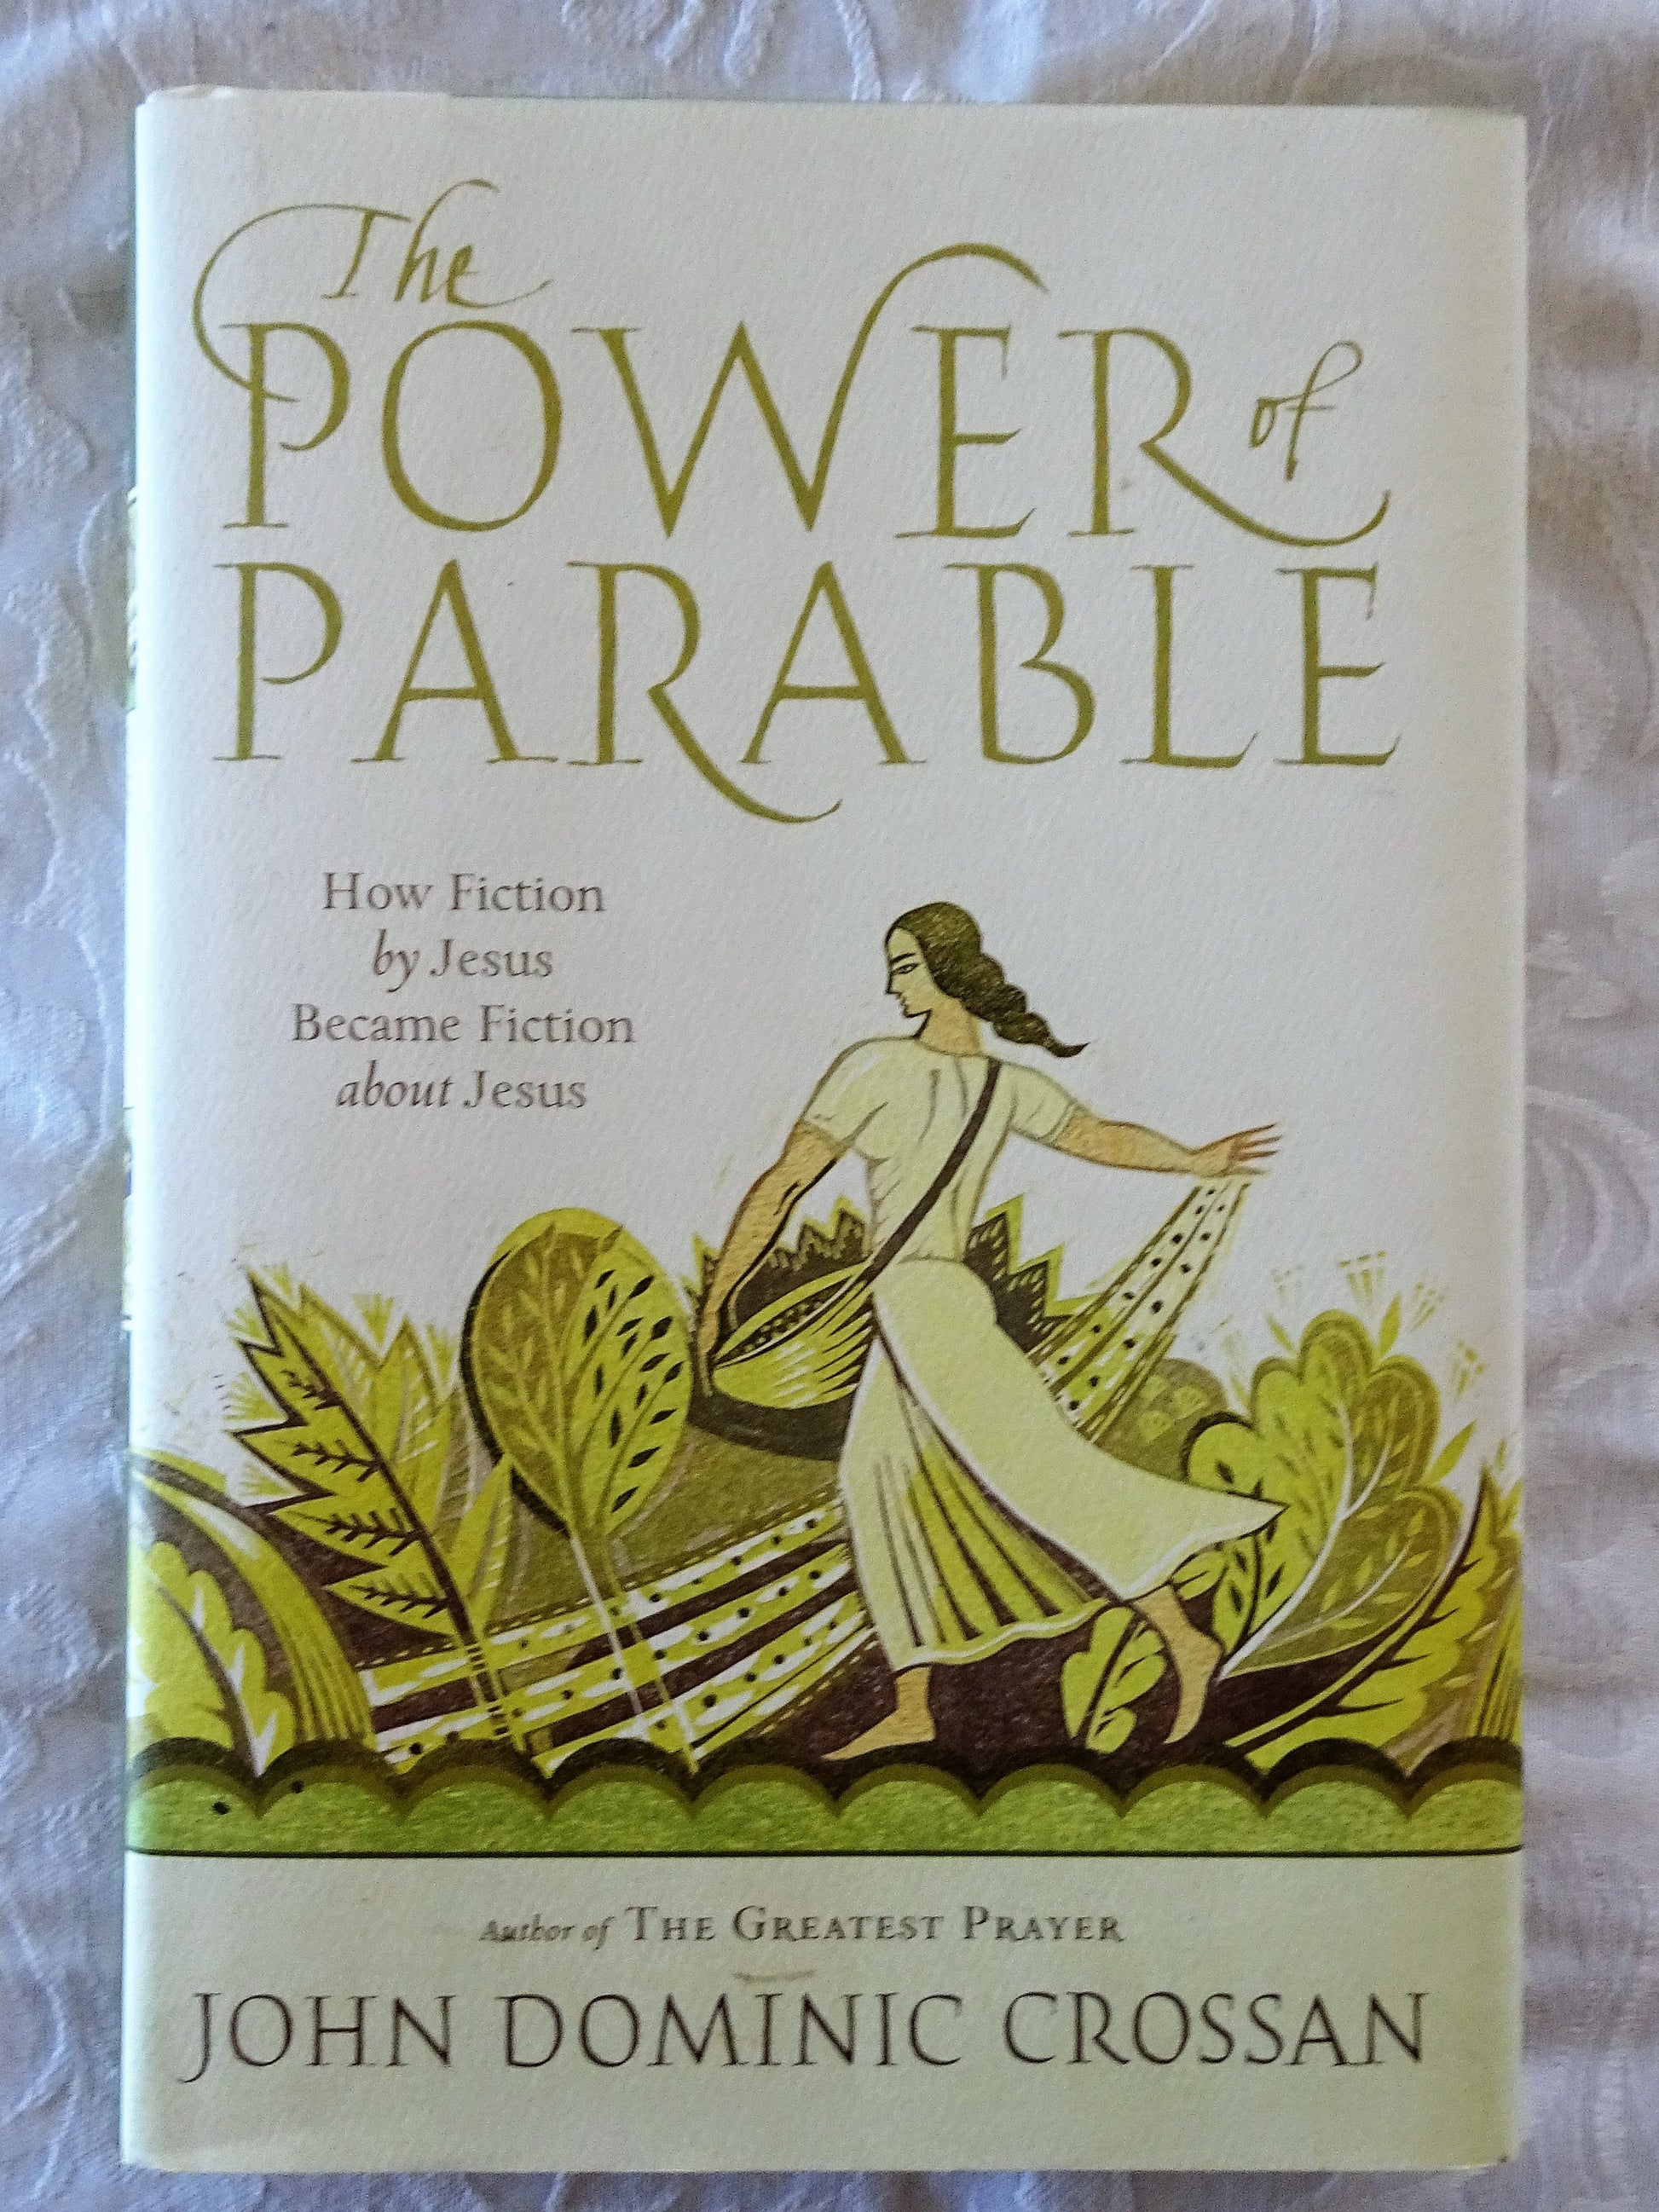 The Power of Parable  How Fiction by Jesus Became Fiction about Jesus  by John Dominic Crossan